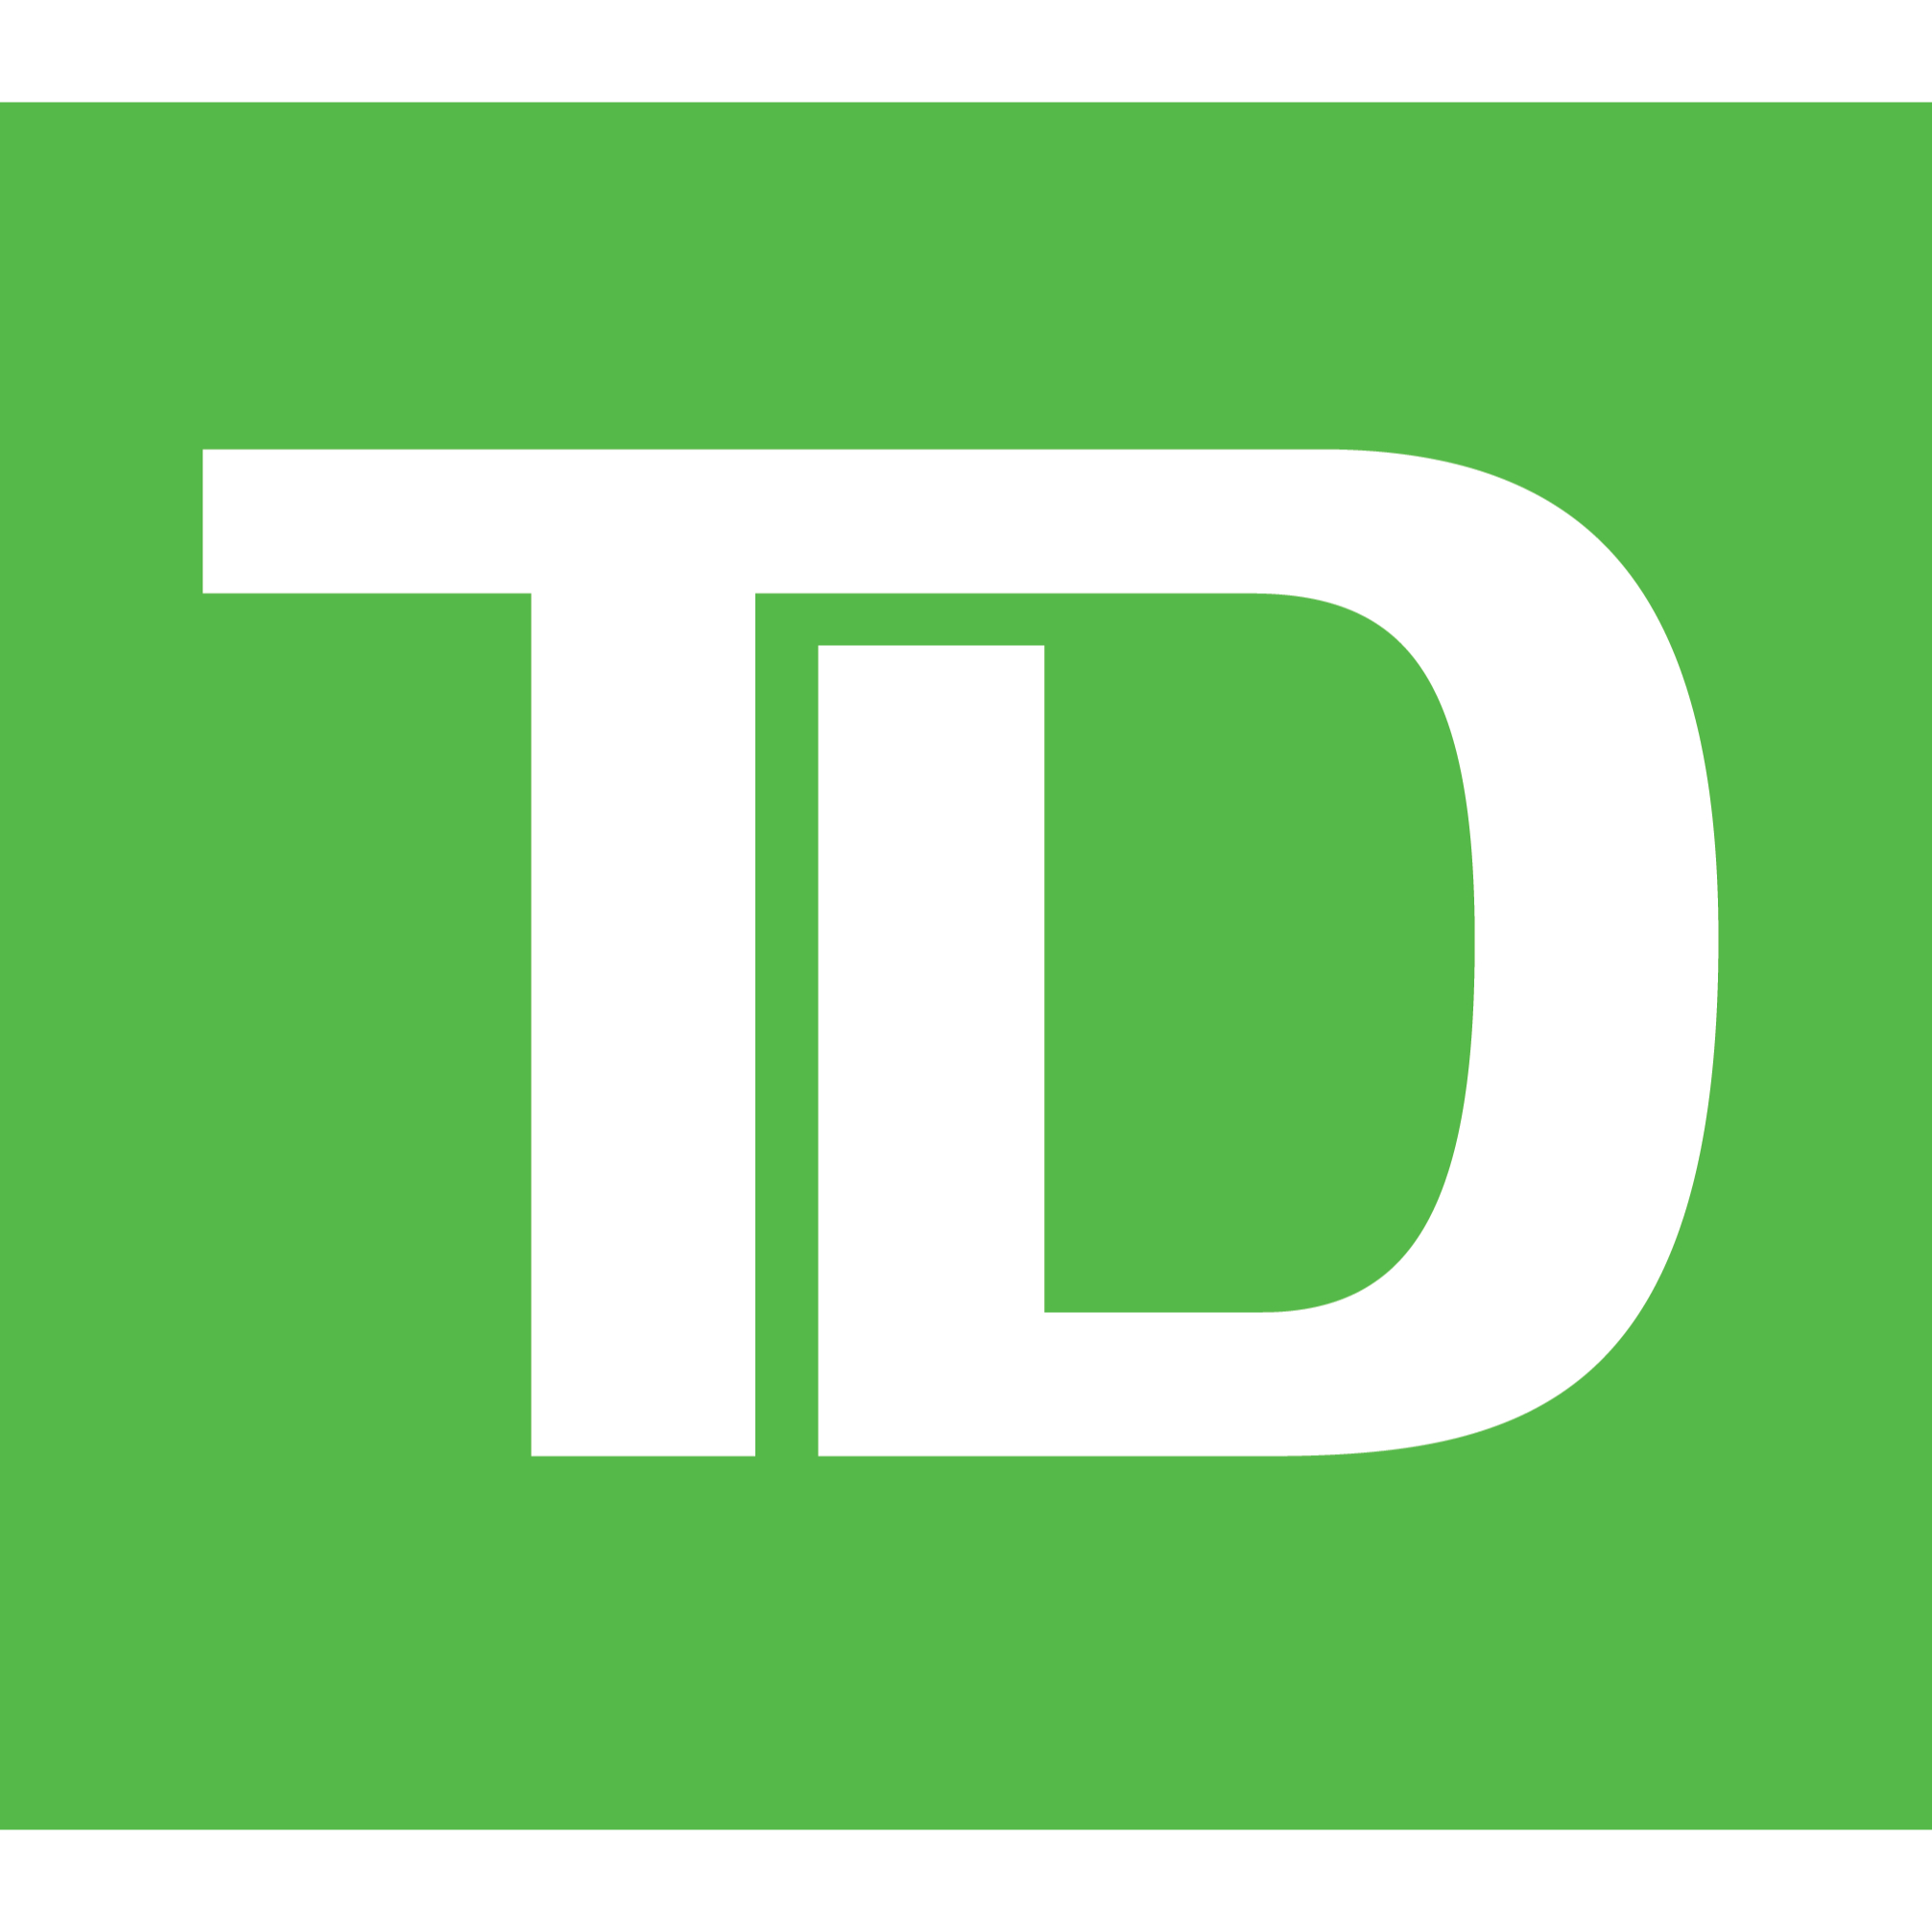 Richard Ken Rodgers - TD Account Manager Small Business - Investment Advisory Services